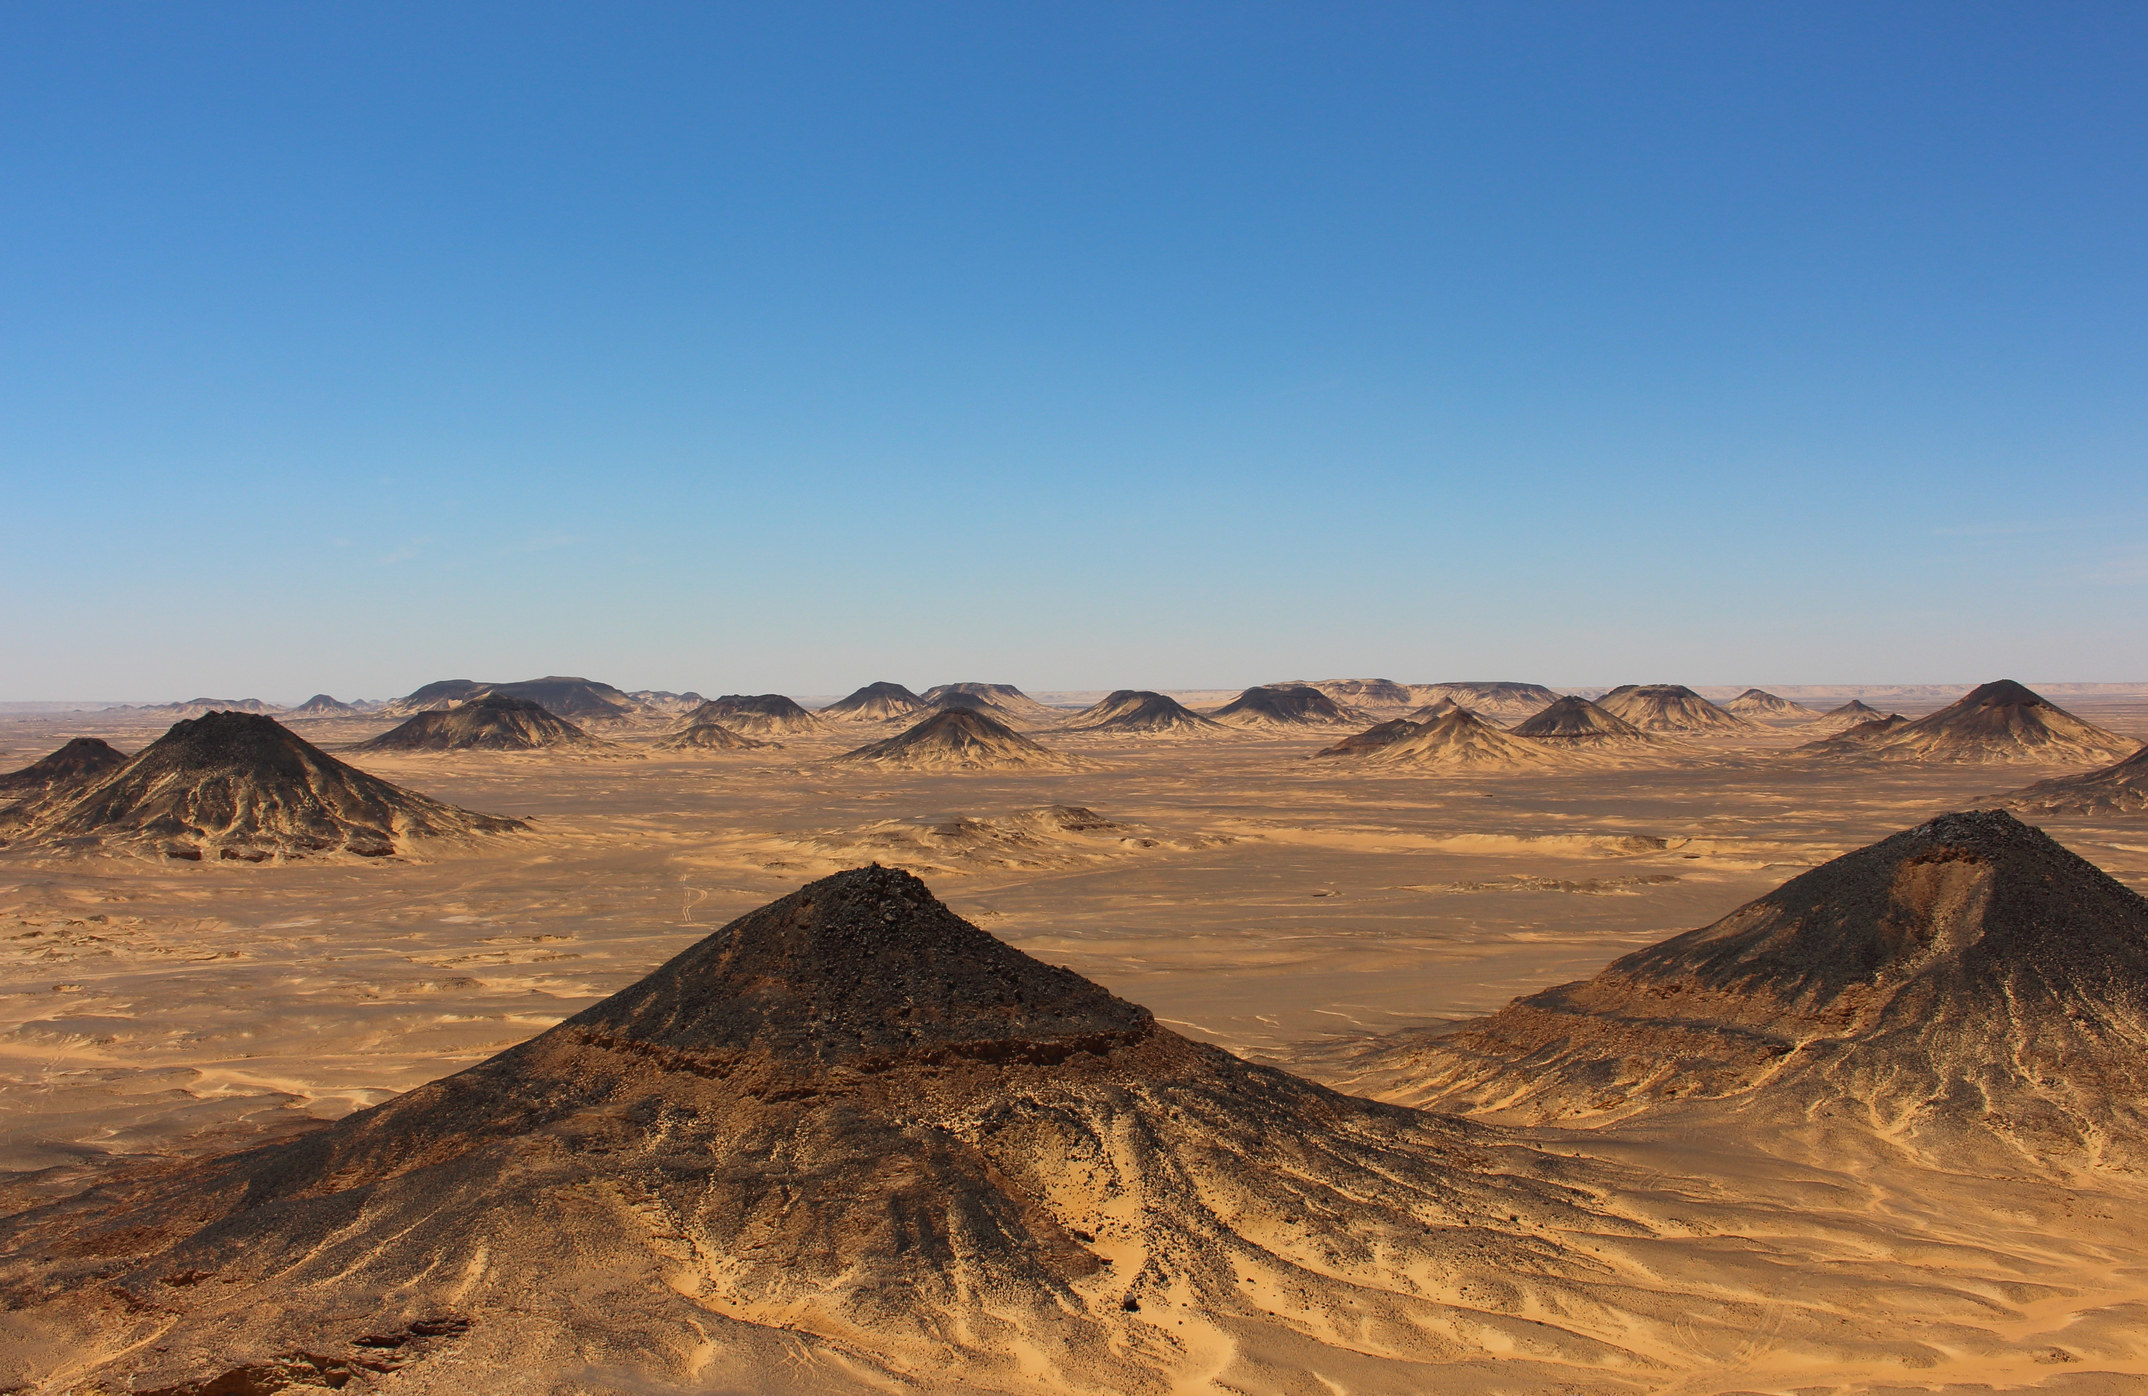 Black capped hills in a desert area